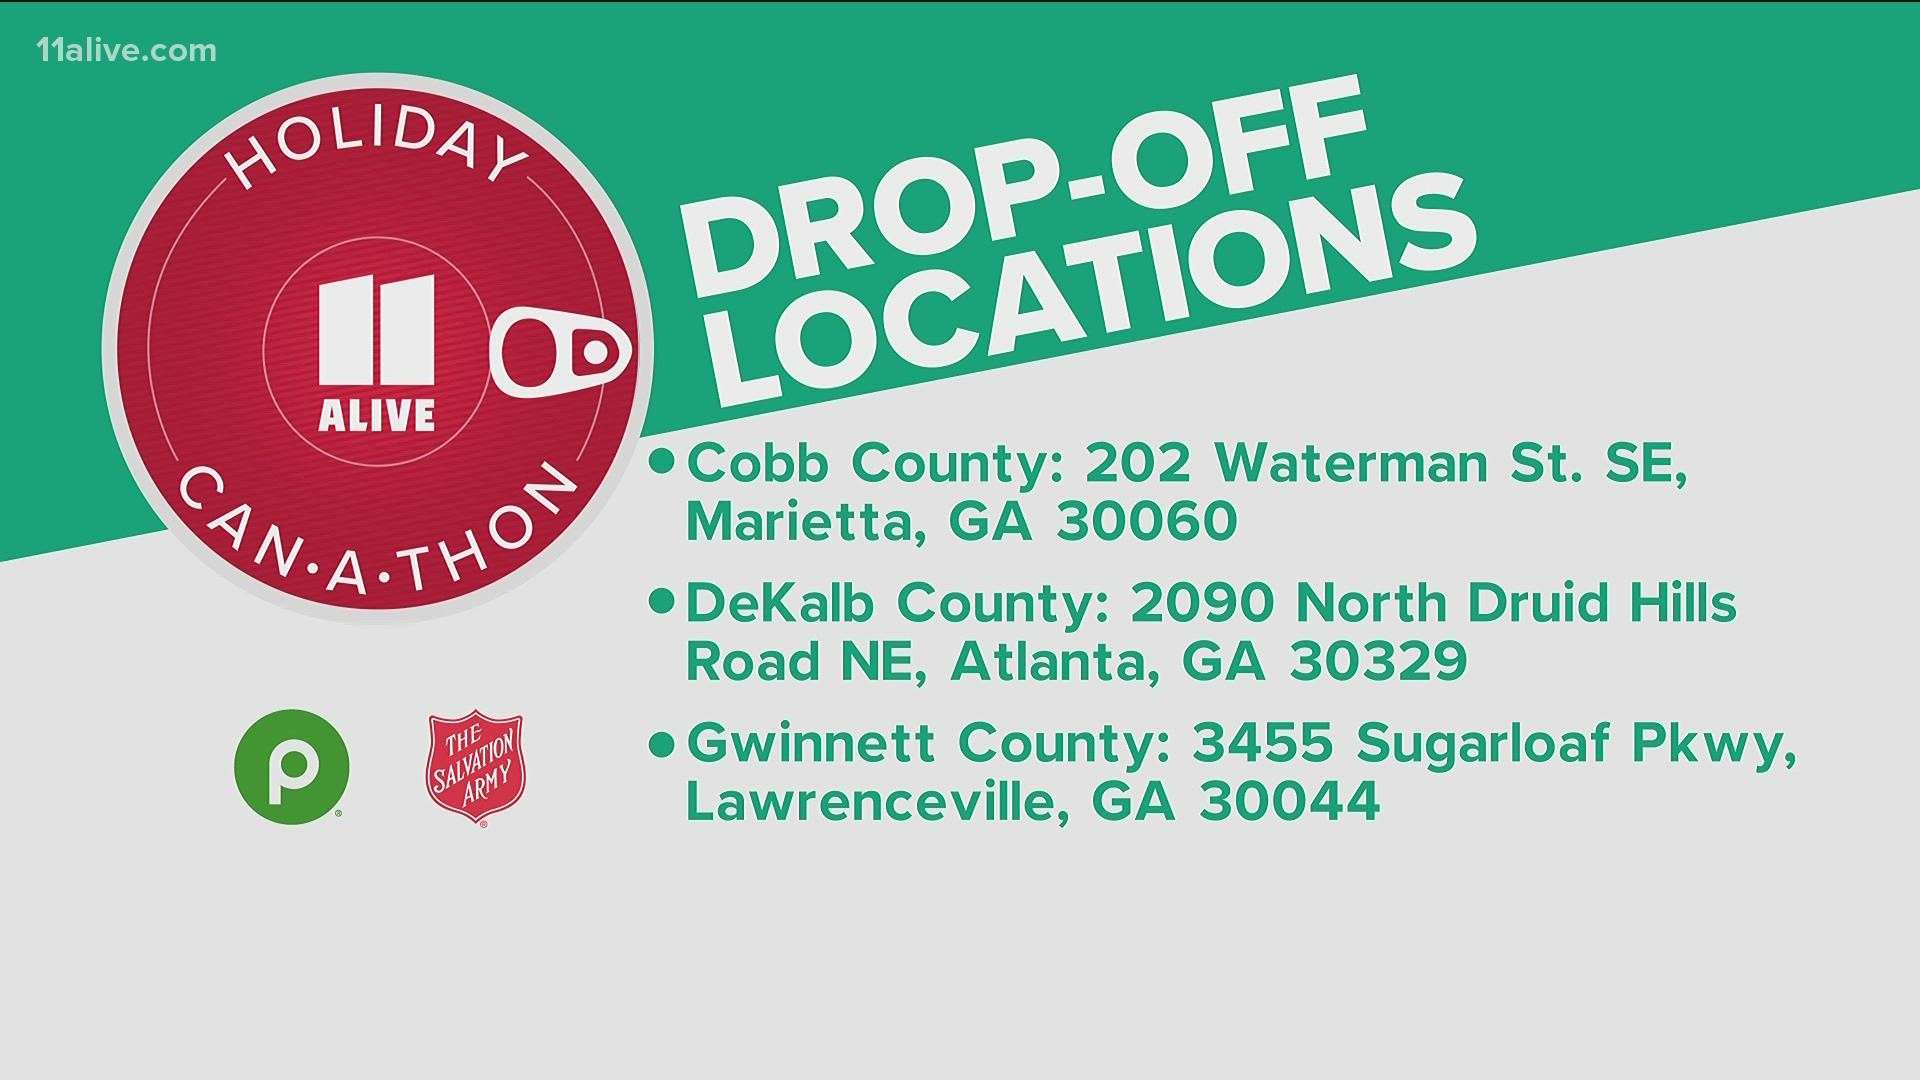 These are drop-off locations for Can-A-Thon